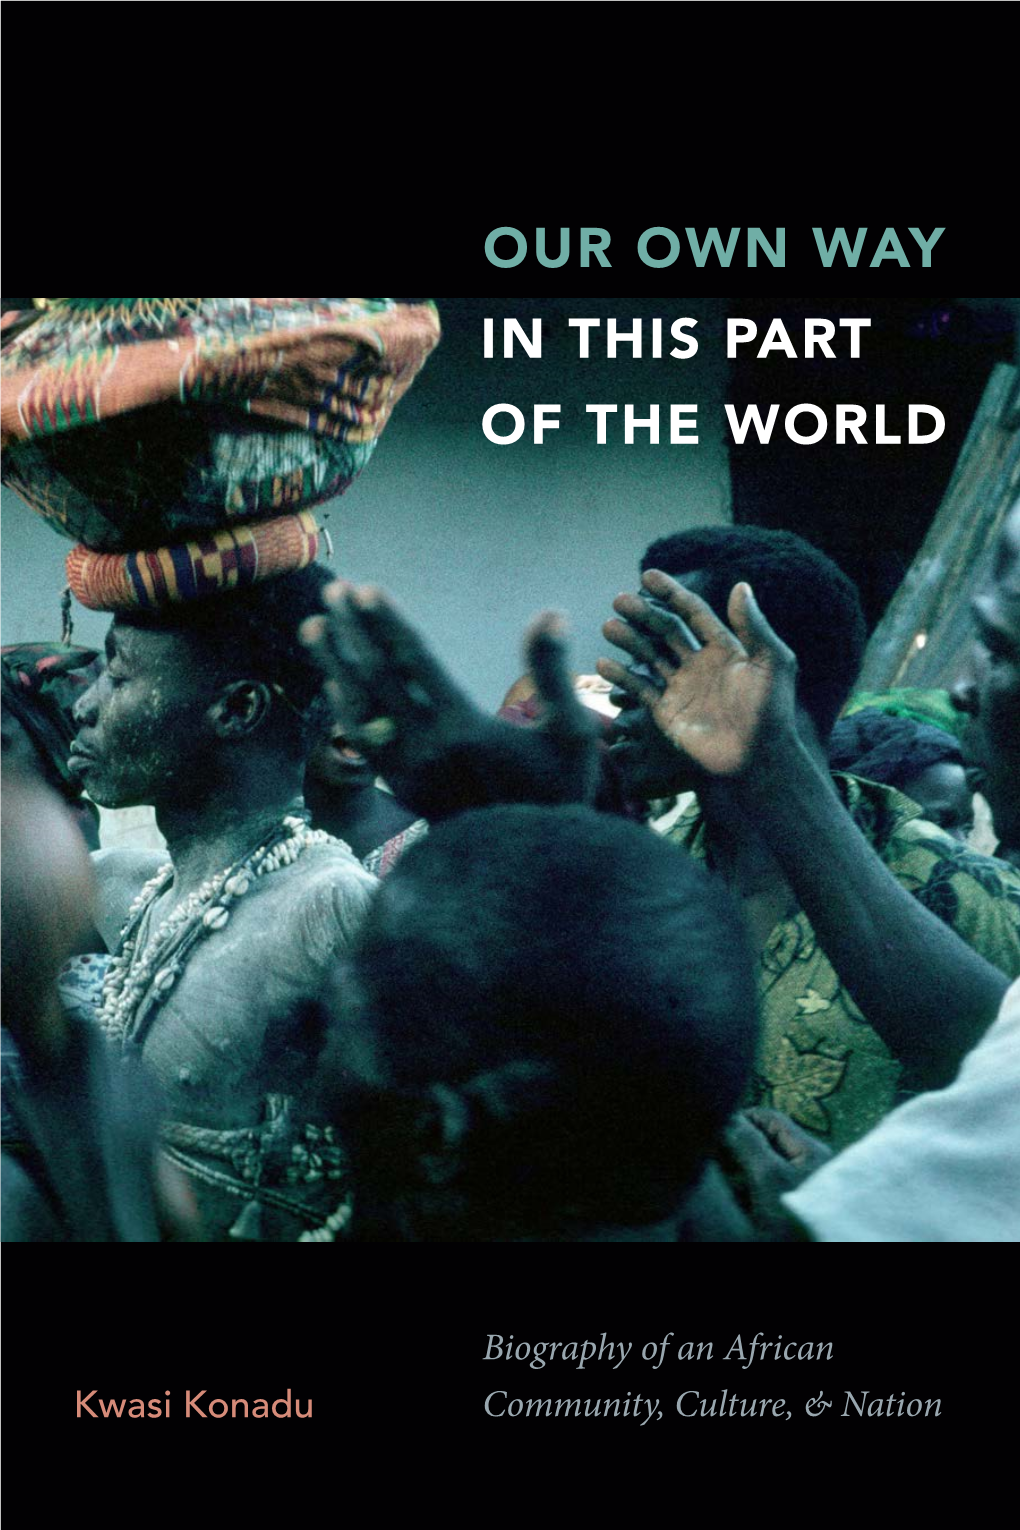 Biography of an African Community, Culture, and Nation